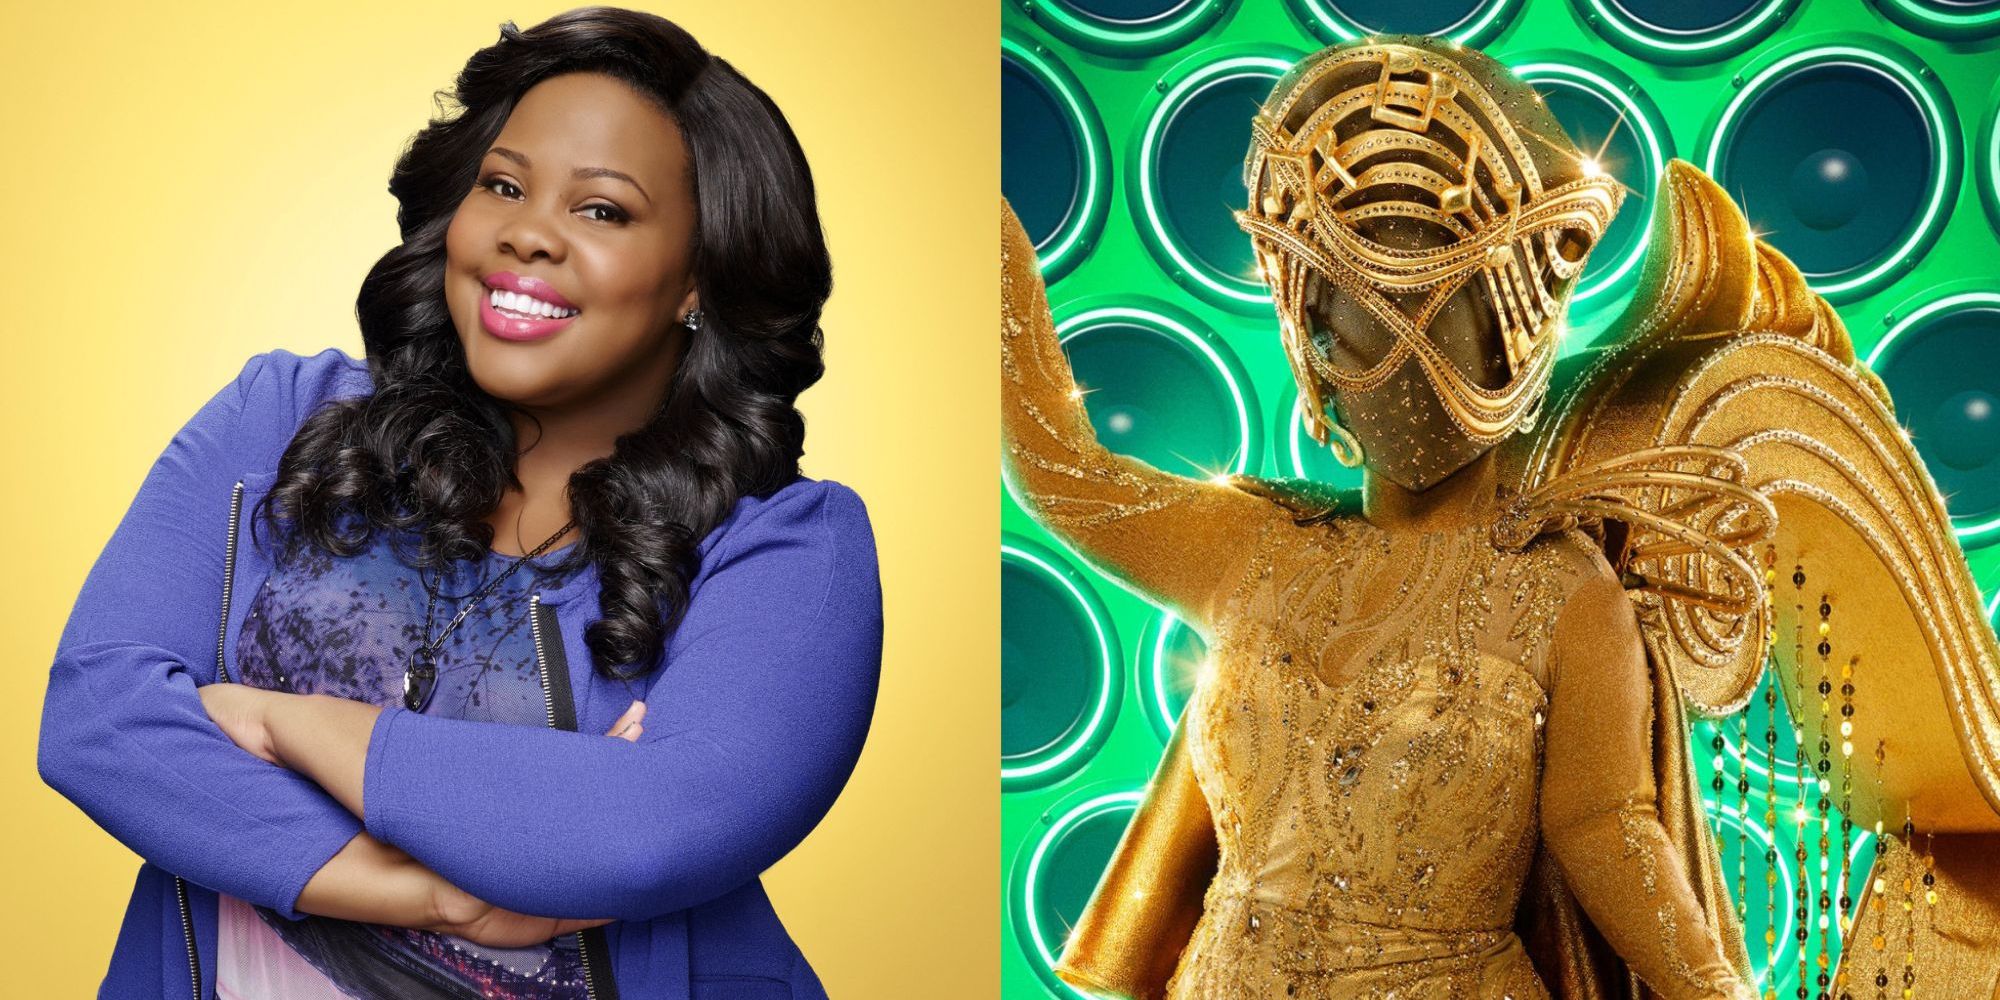 Split image of Glee actress Amber Riley and The Masked Singer contestant Harp